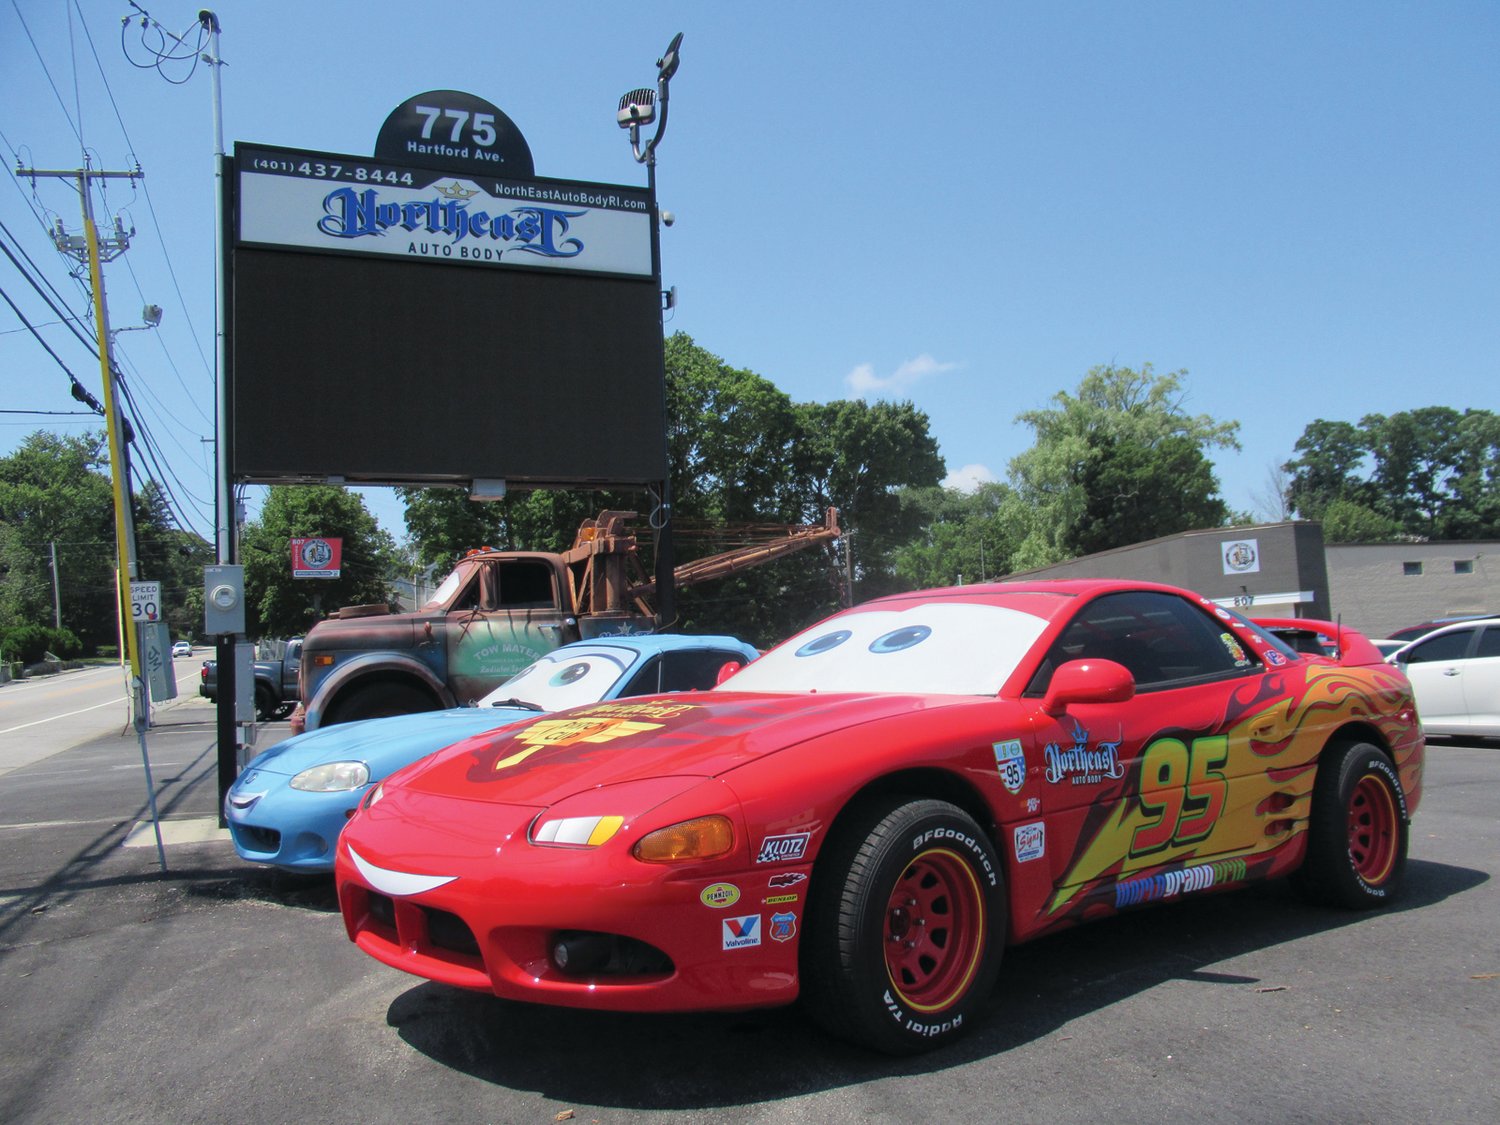 NORTHEAST NICHE: Lightning McQueen, Sally, and Mater are just three of the uniquely detailed vehicles at the 775 Hartford Ave. entrance to Northeast Auto Body, in Johnston. Kids often ask their parents and grandparents to stop for photos with the life-size animated characters come to life.